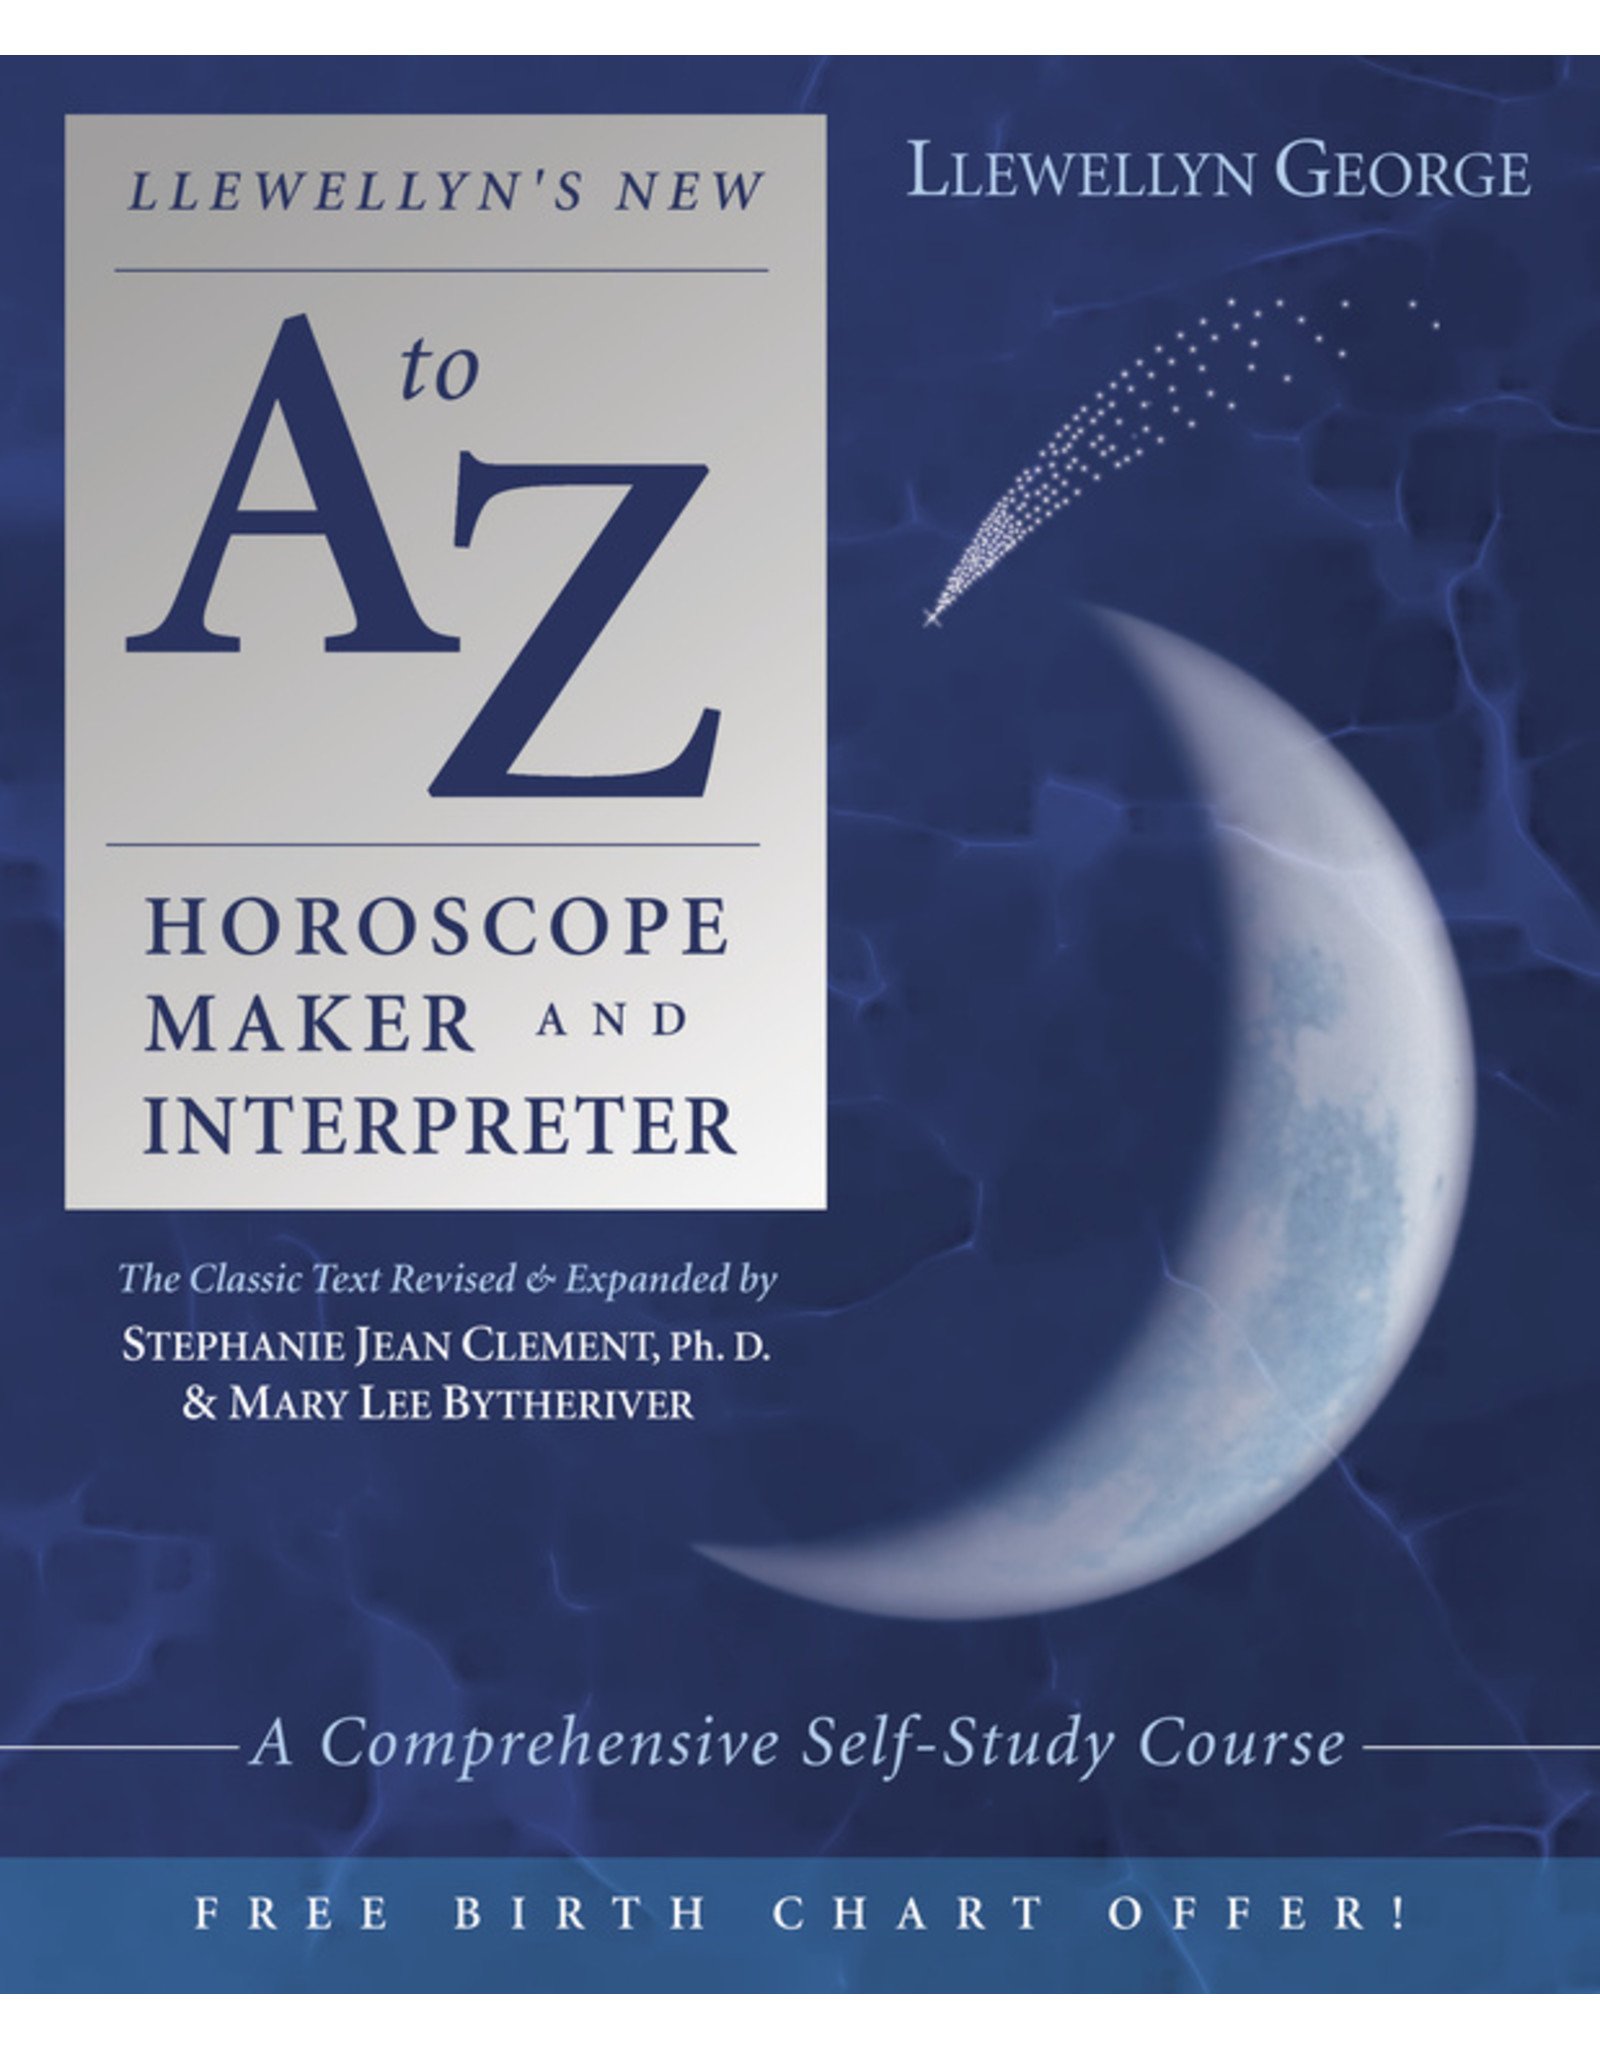 Llewellyn's New A to Z Horoscope Maker and Interpreter